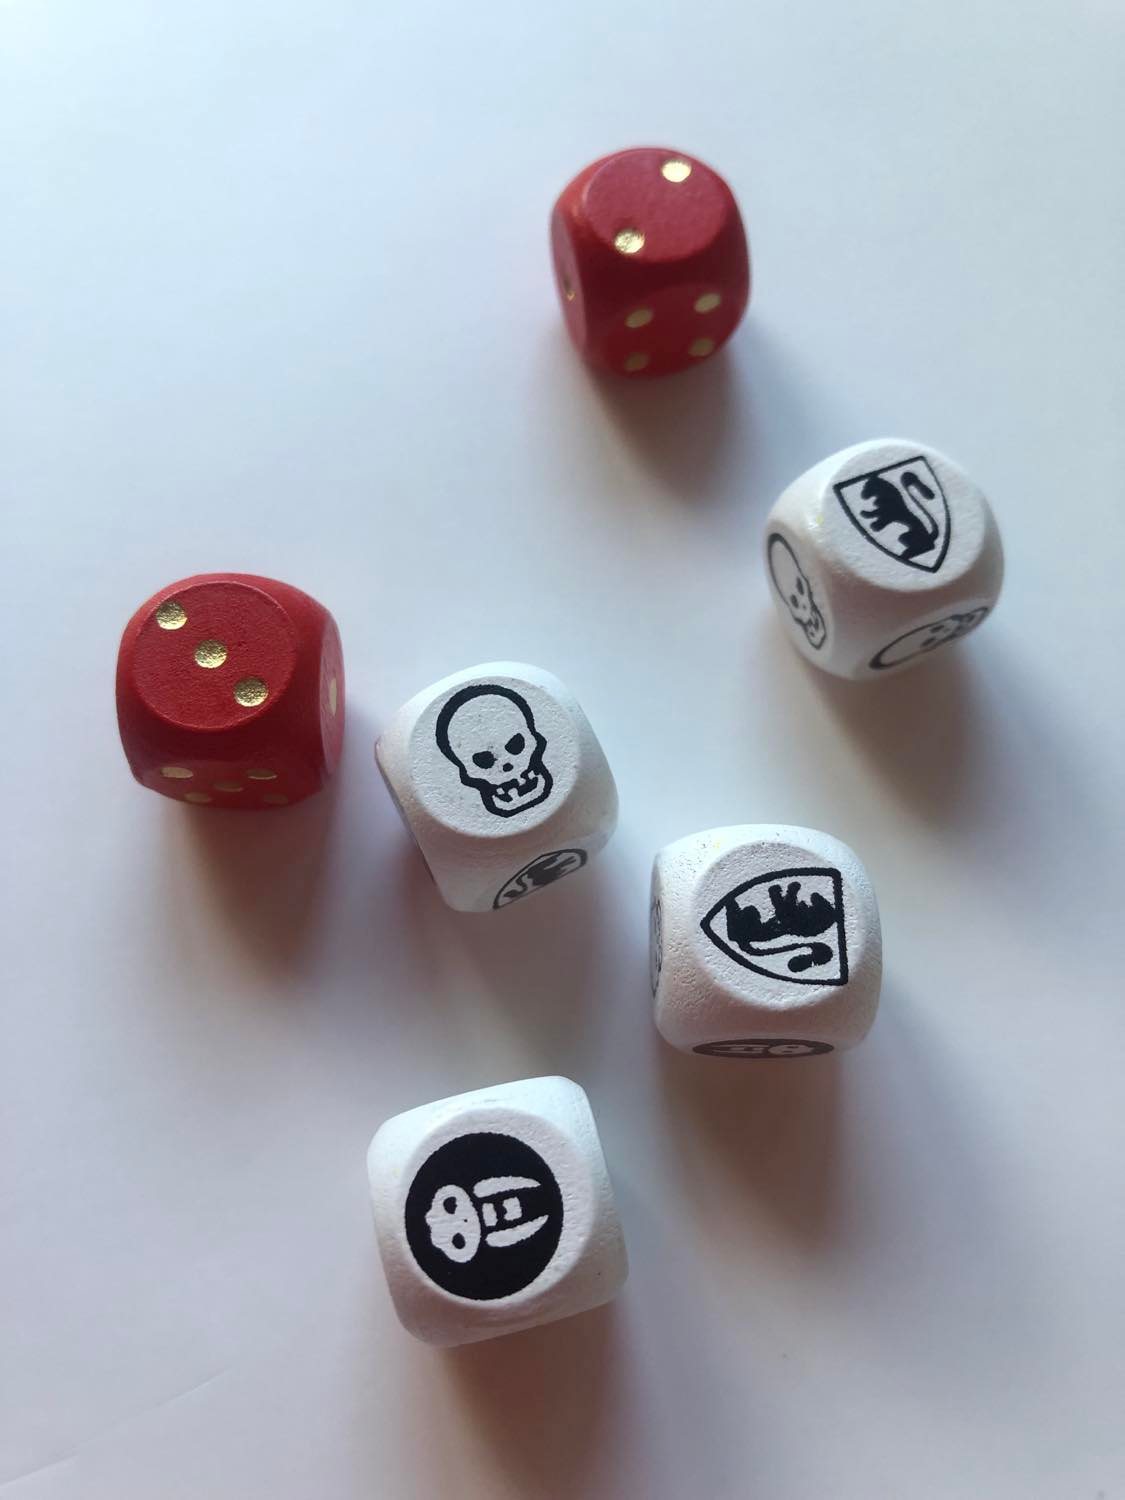 HeroQuest dice, with two red number pip dice (showing a 3 and a 2), and four combat dice, showing a skull, two white shields, and one black shield, sitting on a plain white surface.